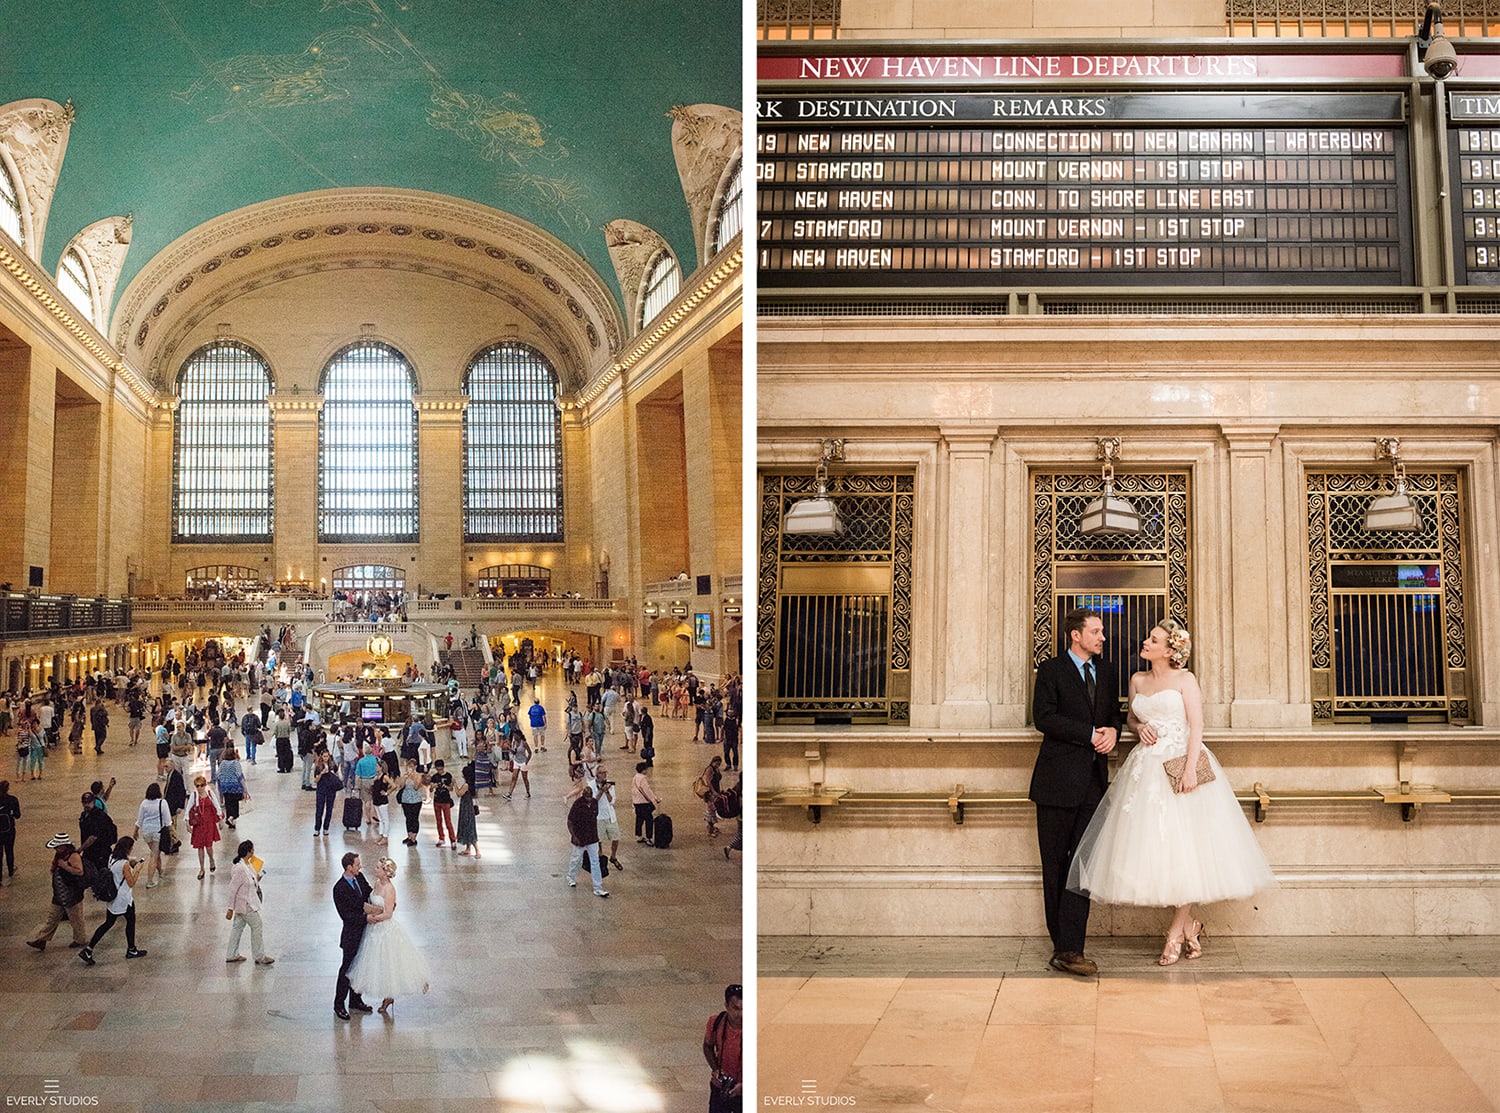 New York elopement at New York City Hall and Grand Central. Photos by New York wedding photographer Everly Studios, www.everlystudios.com